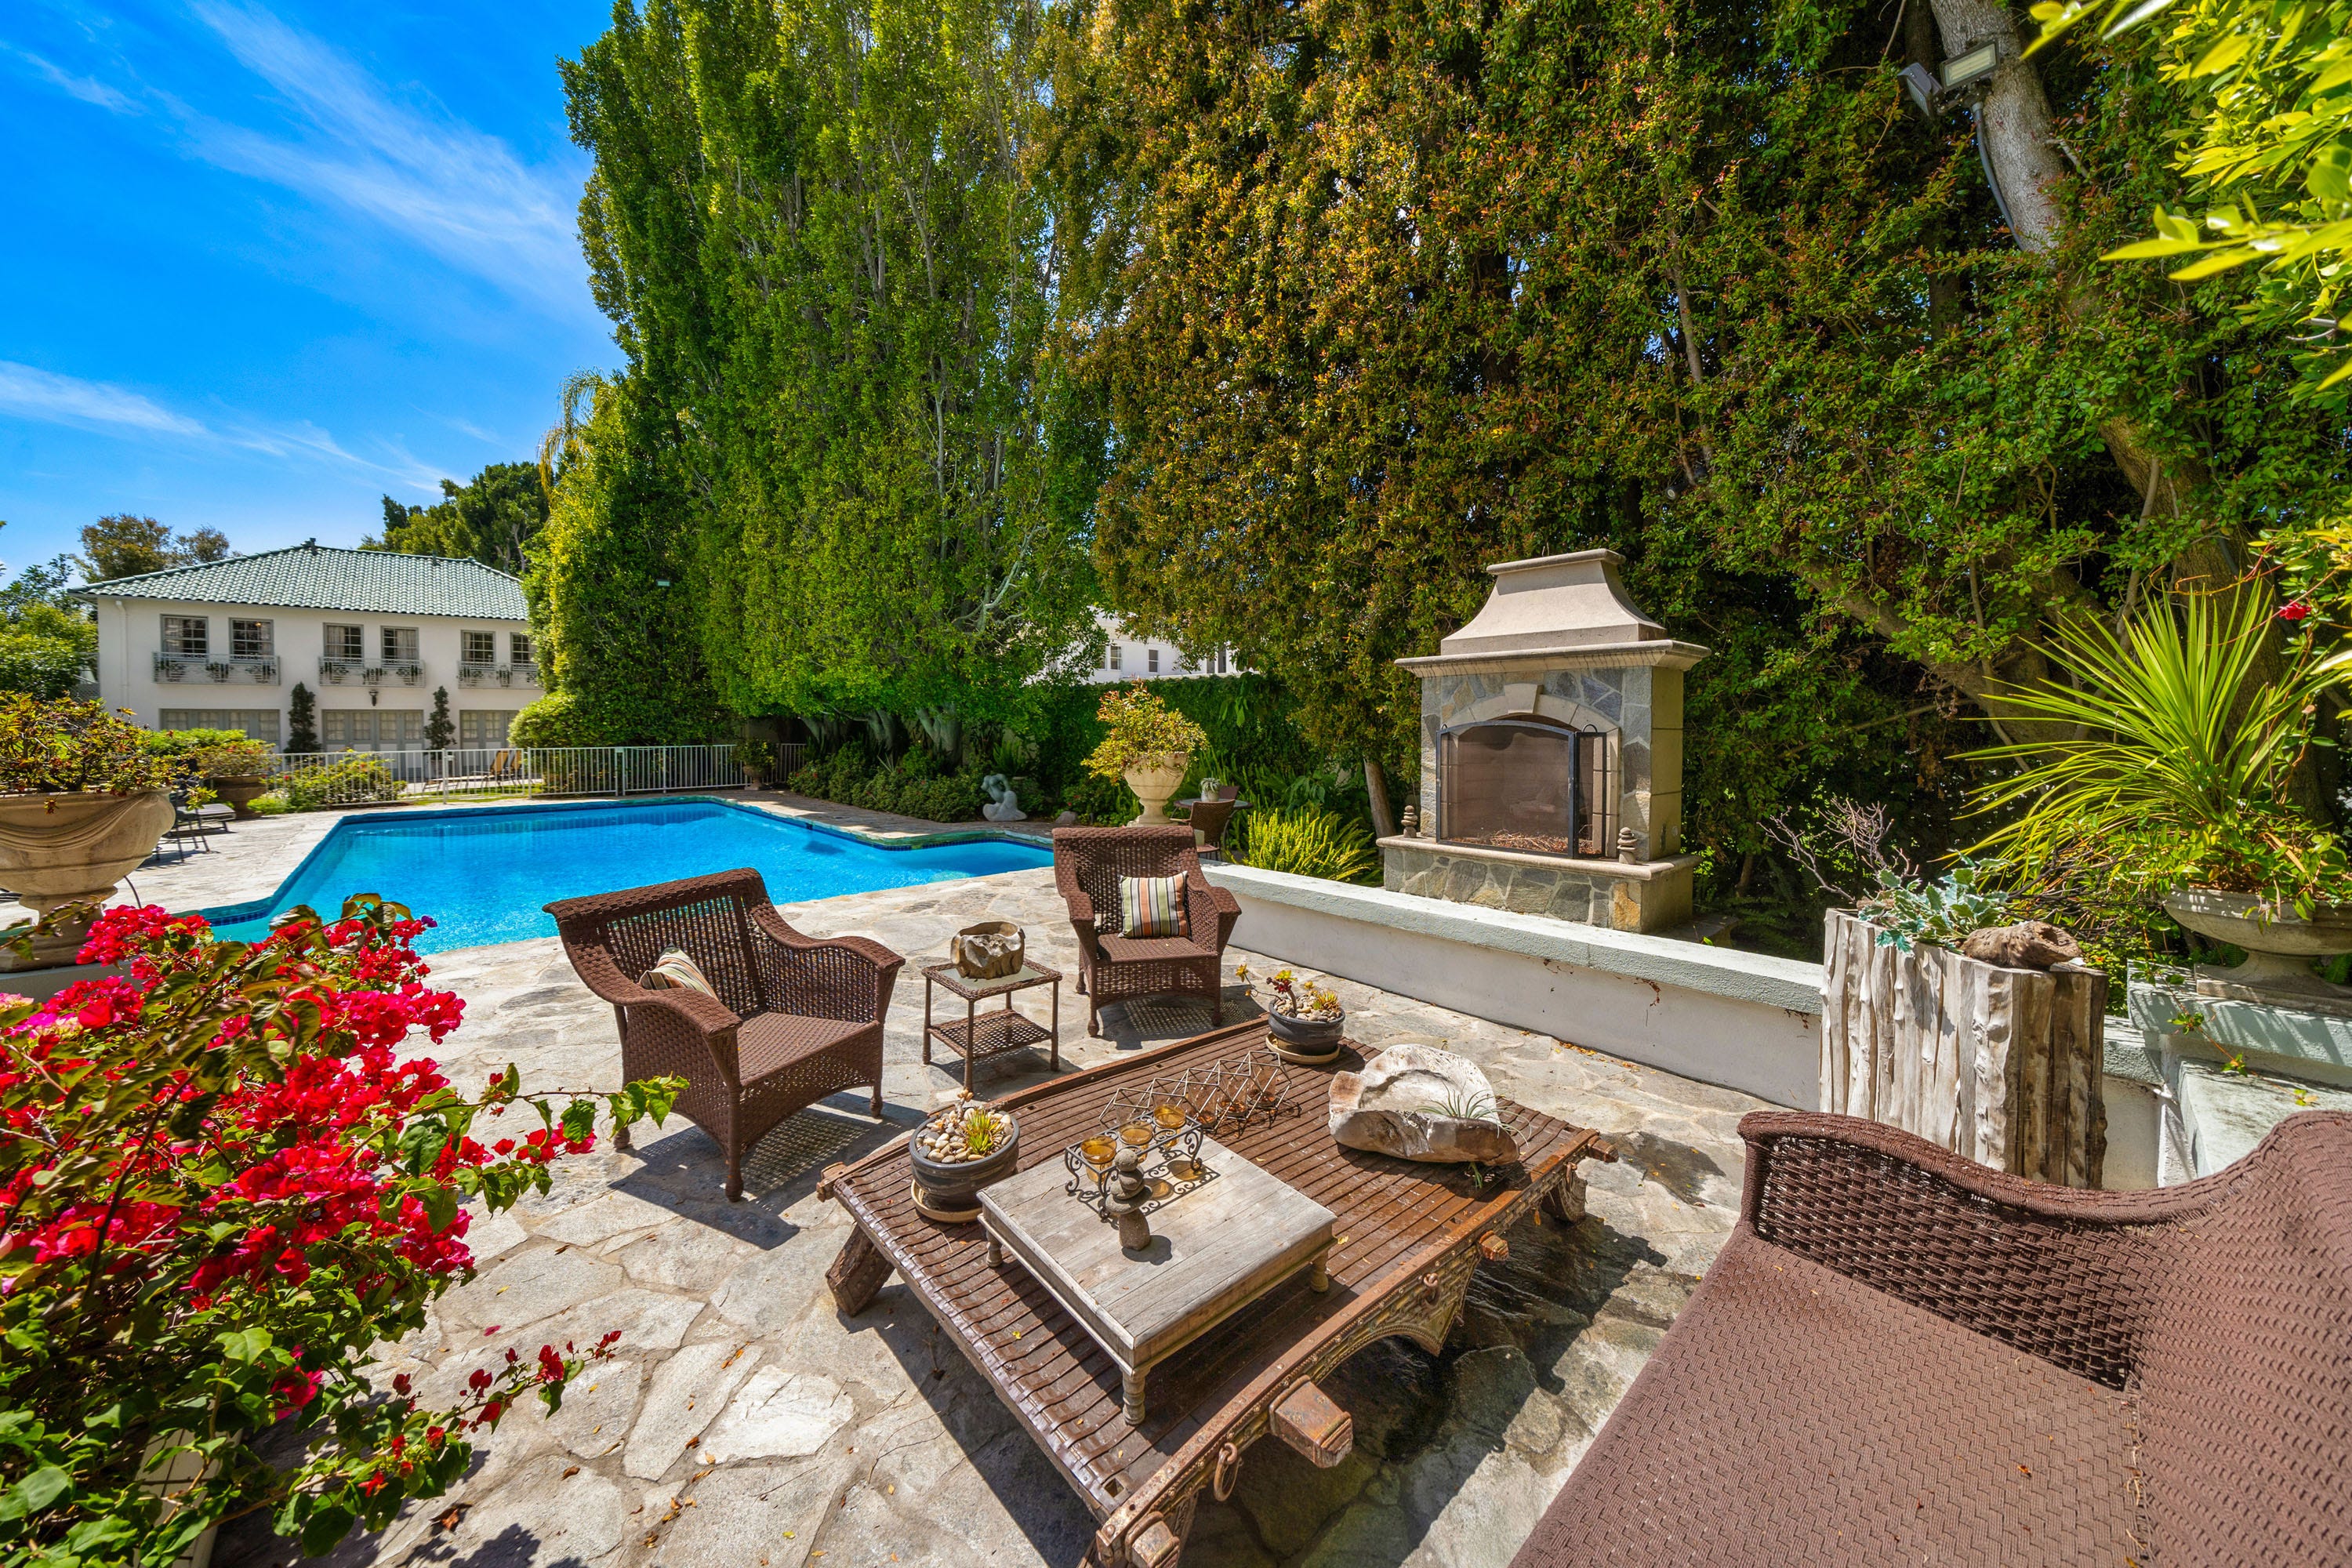 swanky los angeles mansion once owned by muhammad ali up for auction. see photos